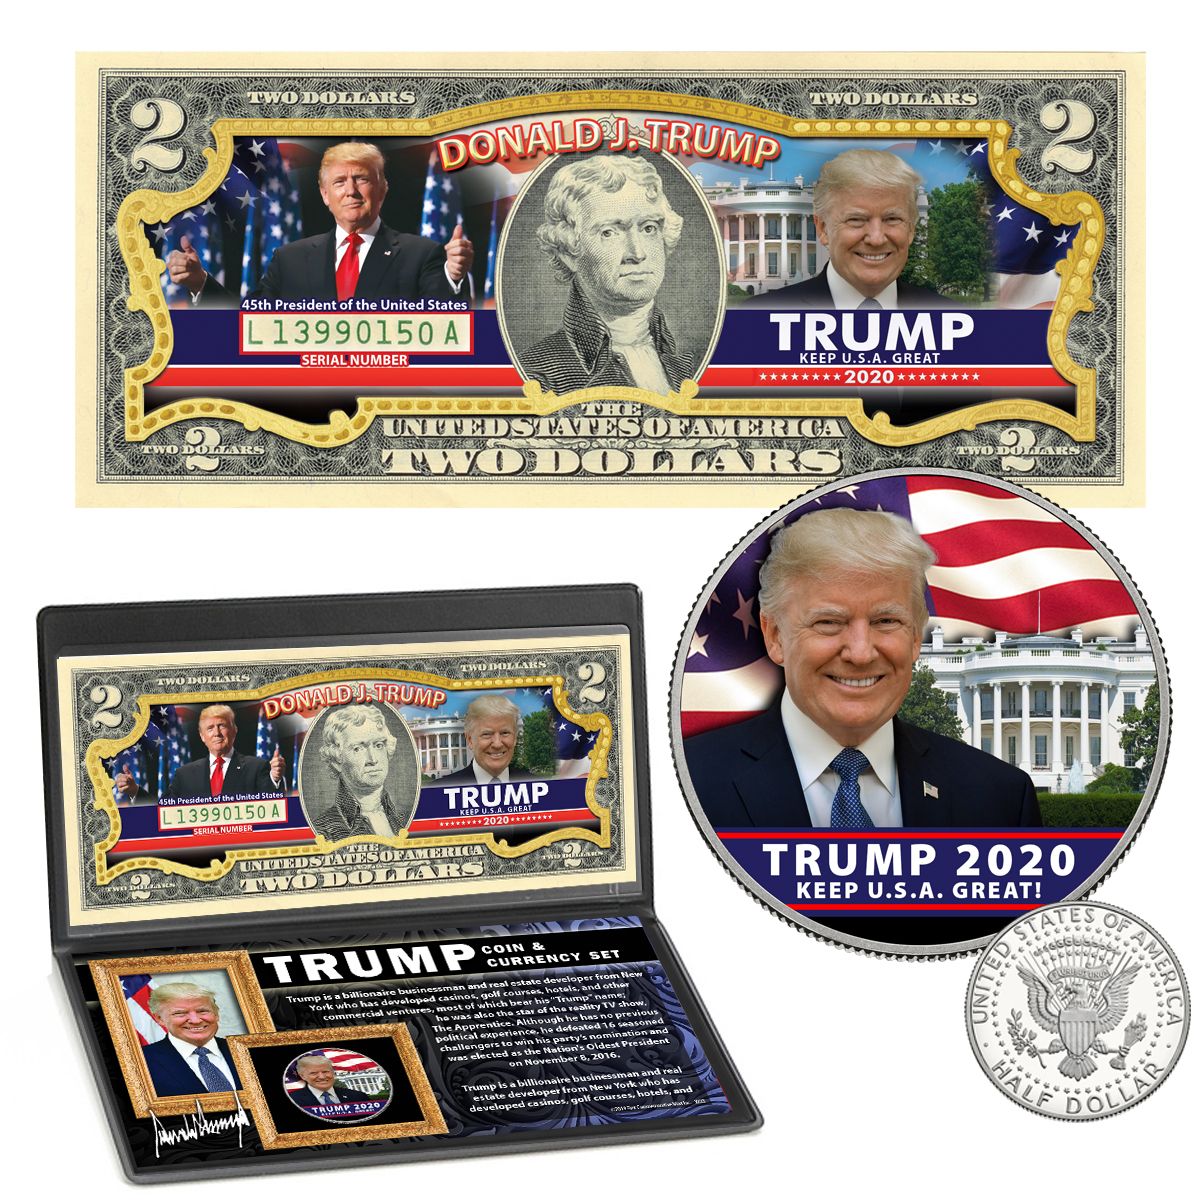 DONALD TRUMP 45th President Official Colorized 2016 Presidential Dollar $1 Coin 